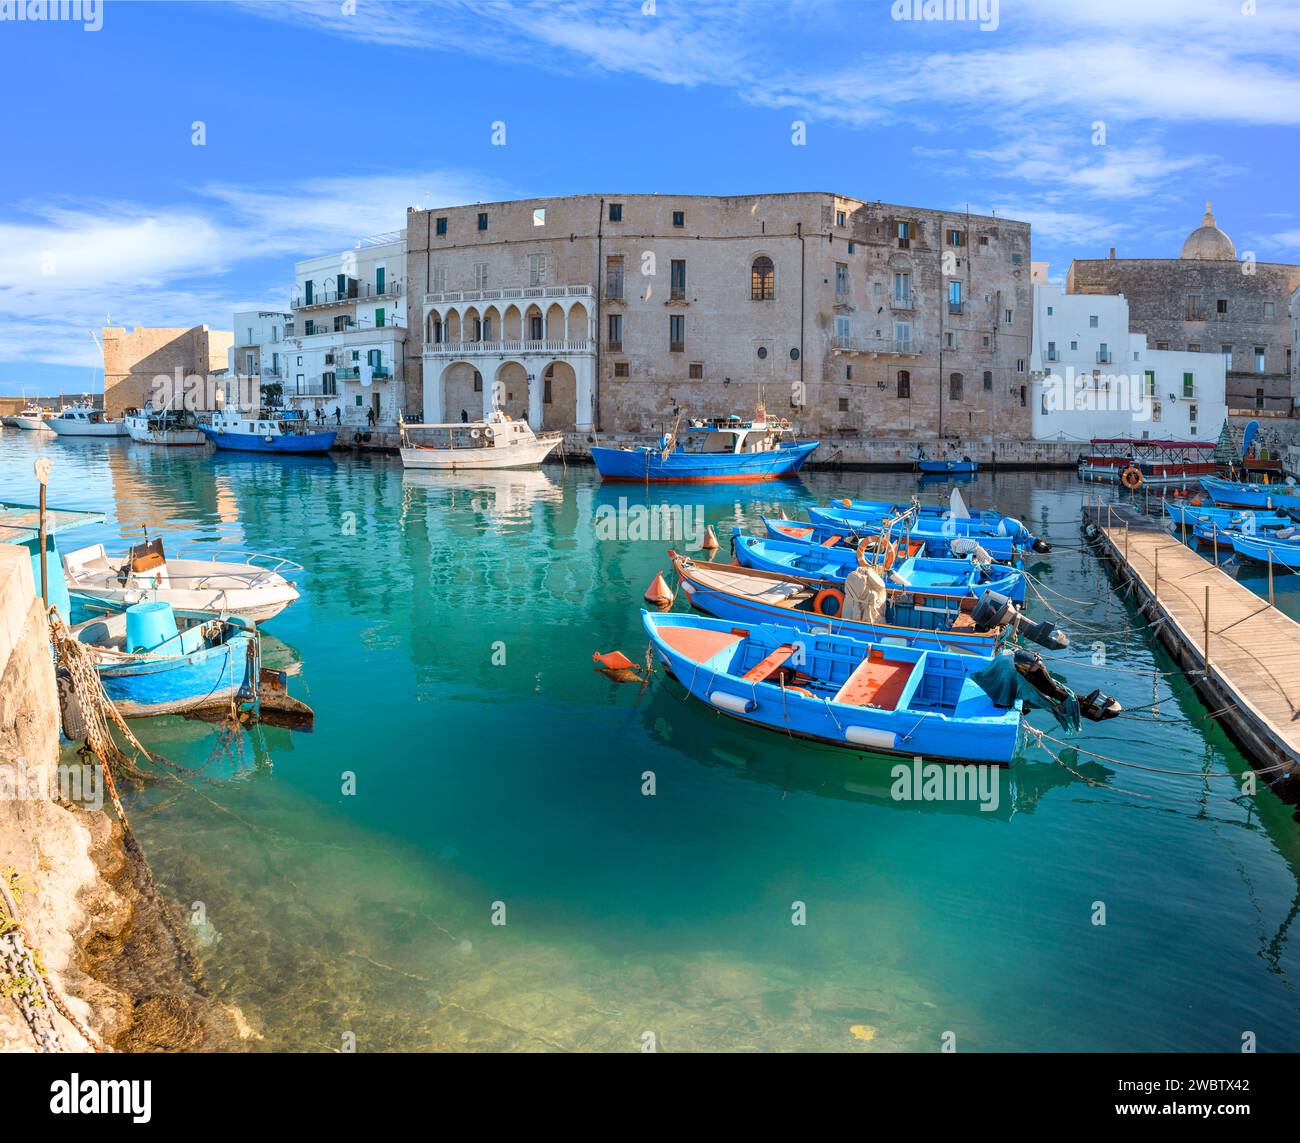 Old port of Monopoli in Apulia, southern Italy: view of the old town with fishing and rowing boats. Stock Photo